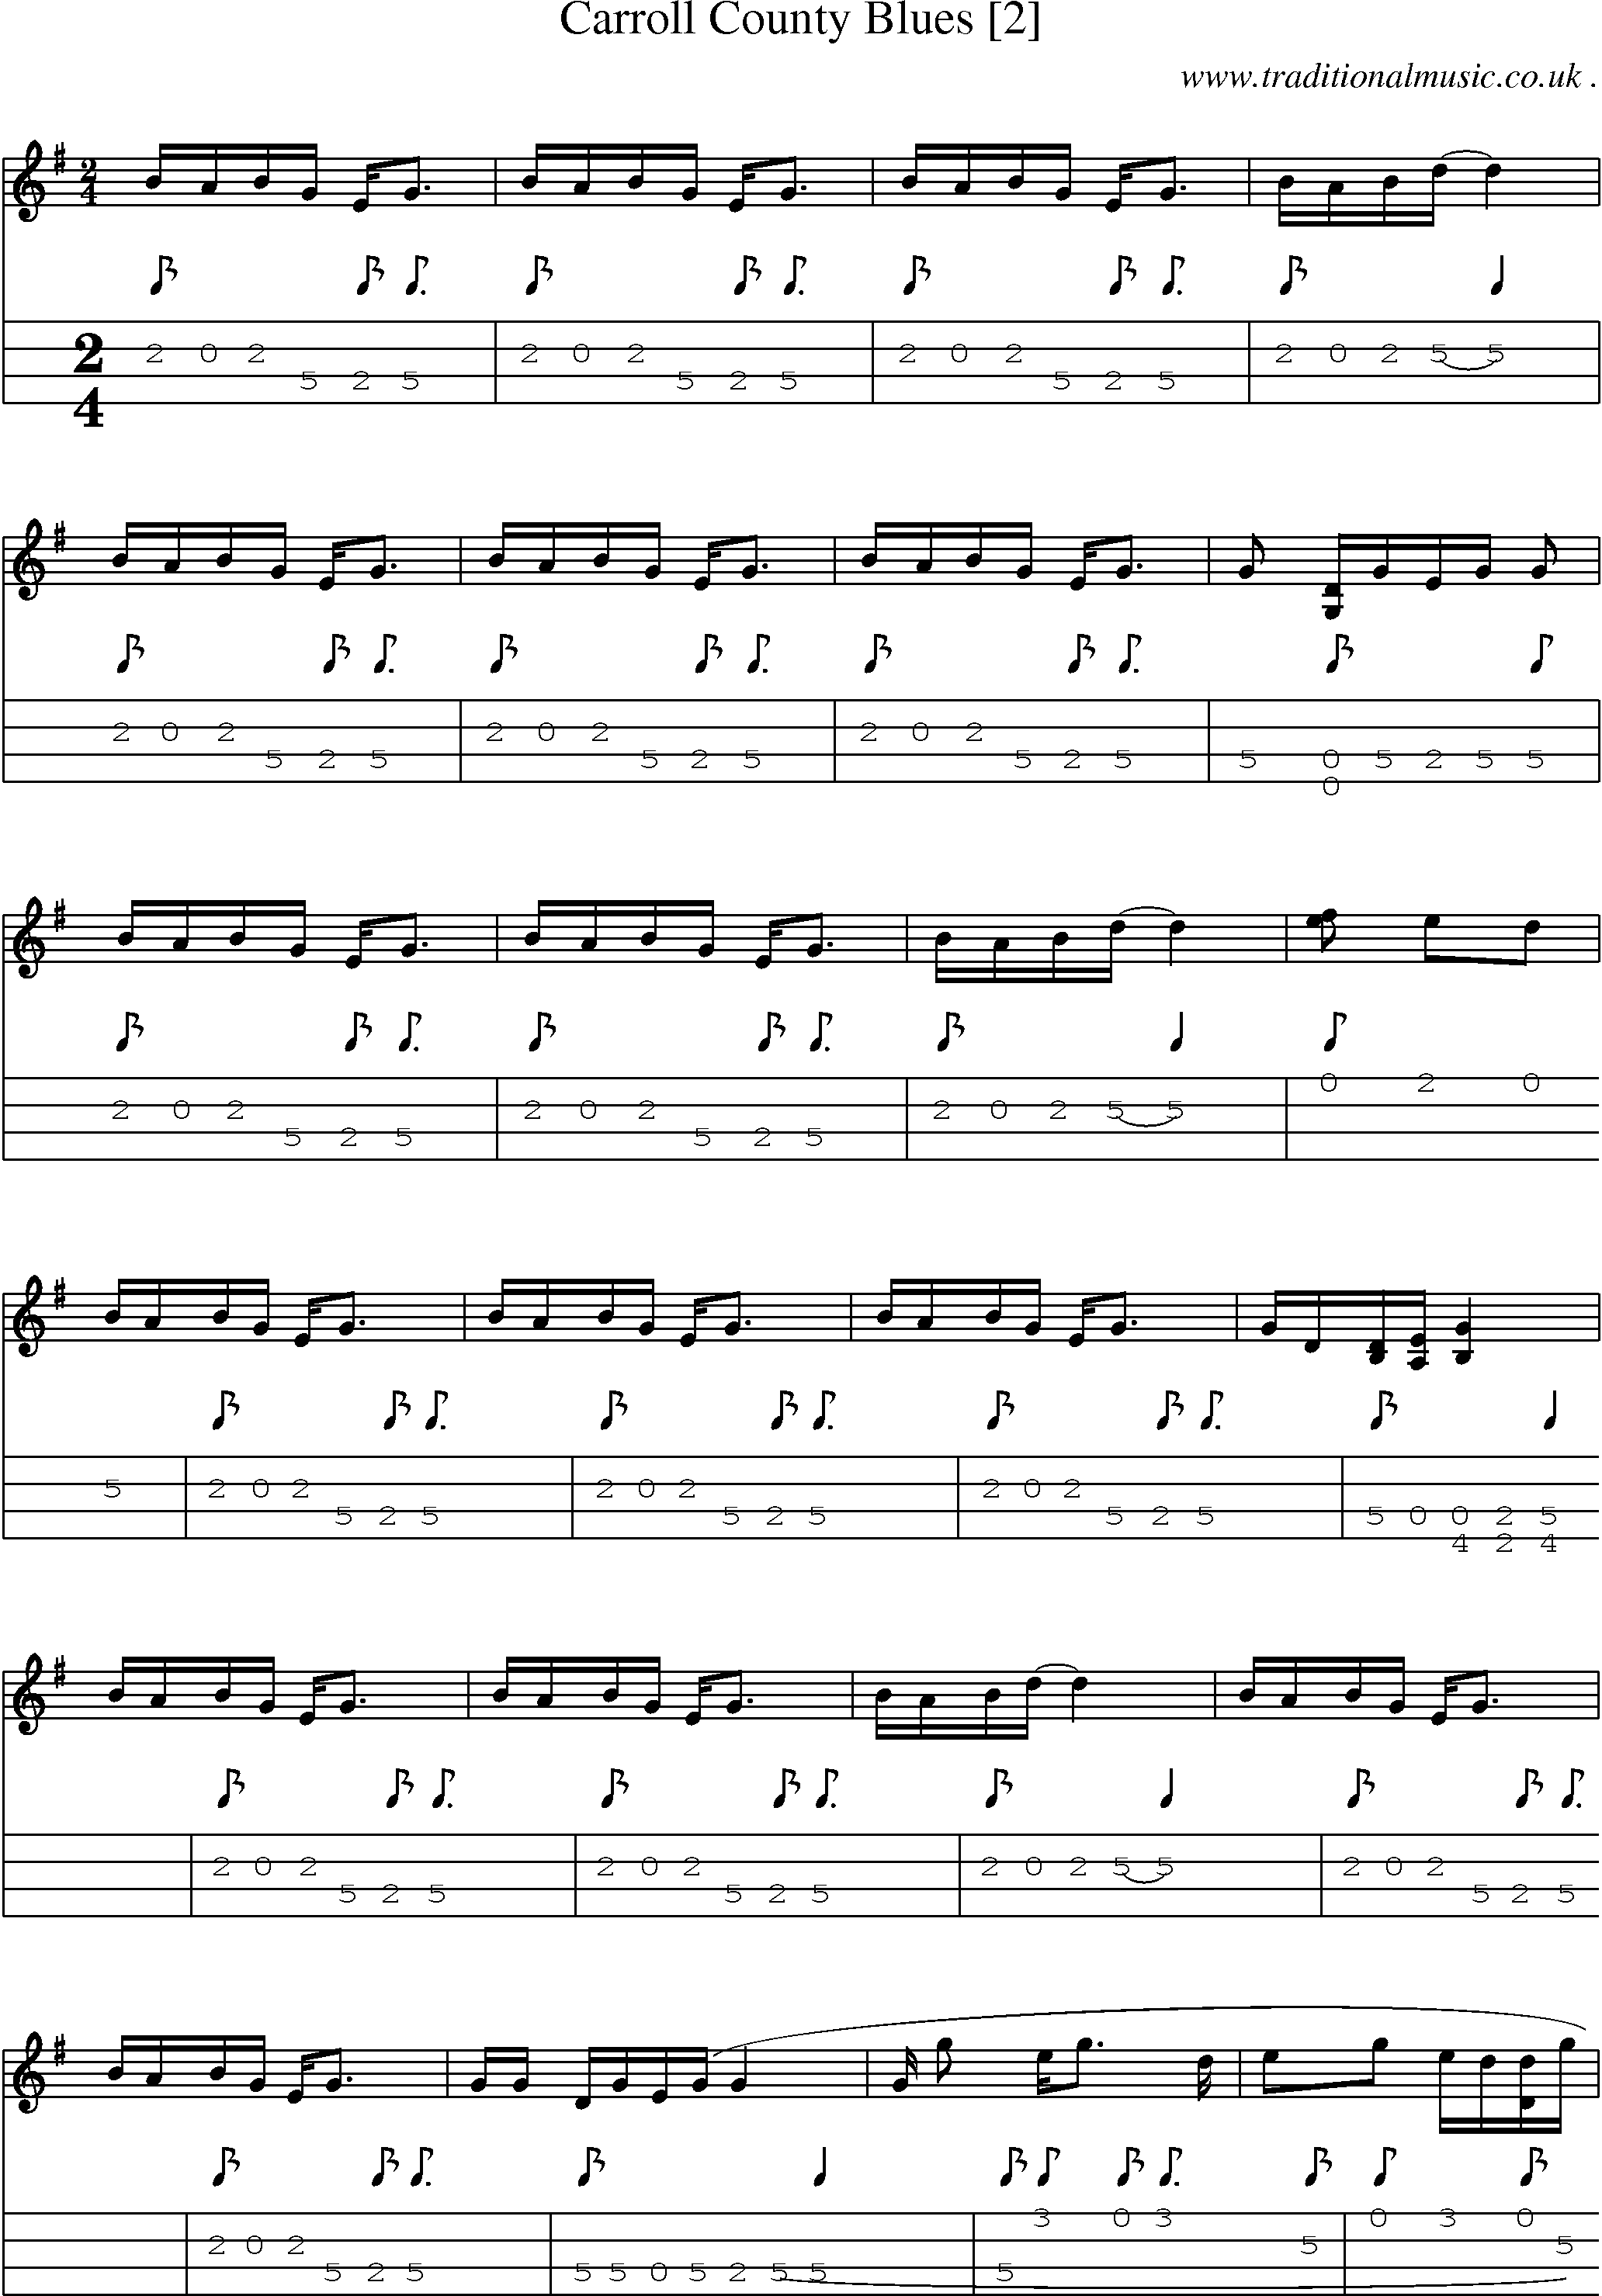 Music Score and Mandolin Tabs for Carroll County Blues [2]